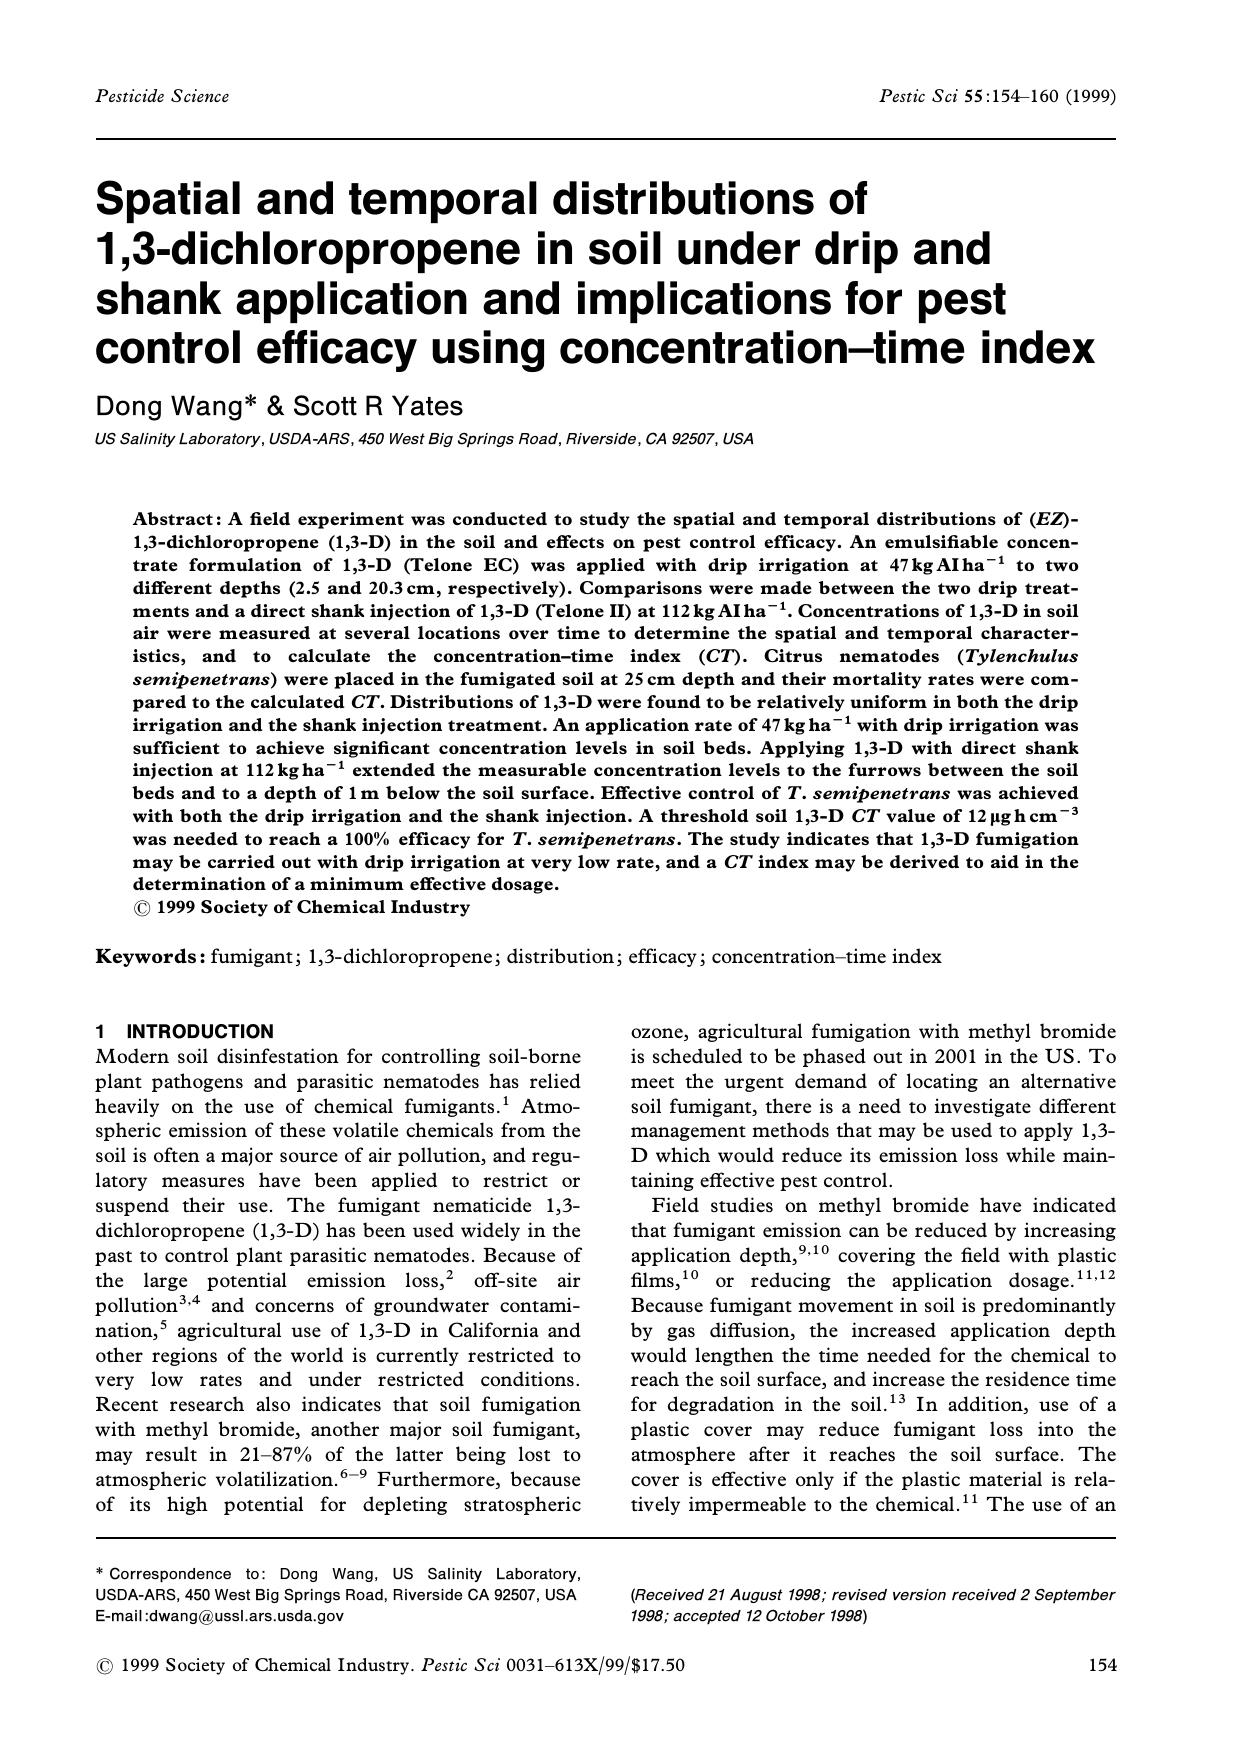 Spatial and temporal distributions of 1,3dichloropropene in soil under drip and shank application and implications for pest control efficacy using concentrationtime index by Unknown